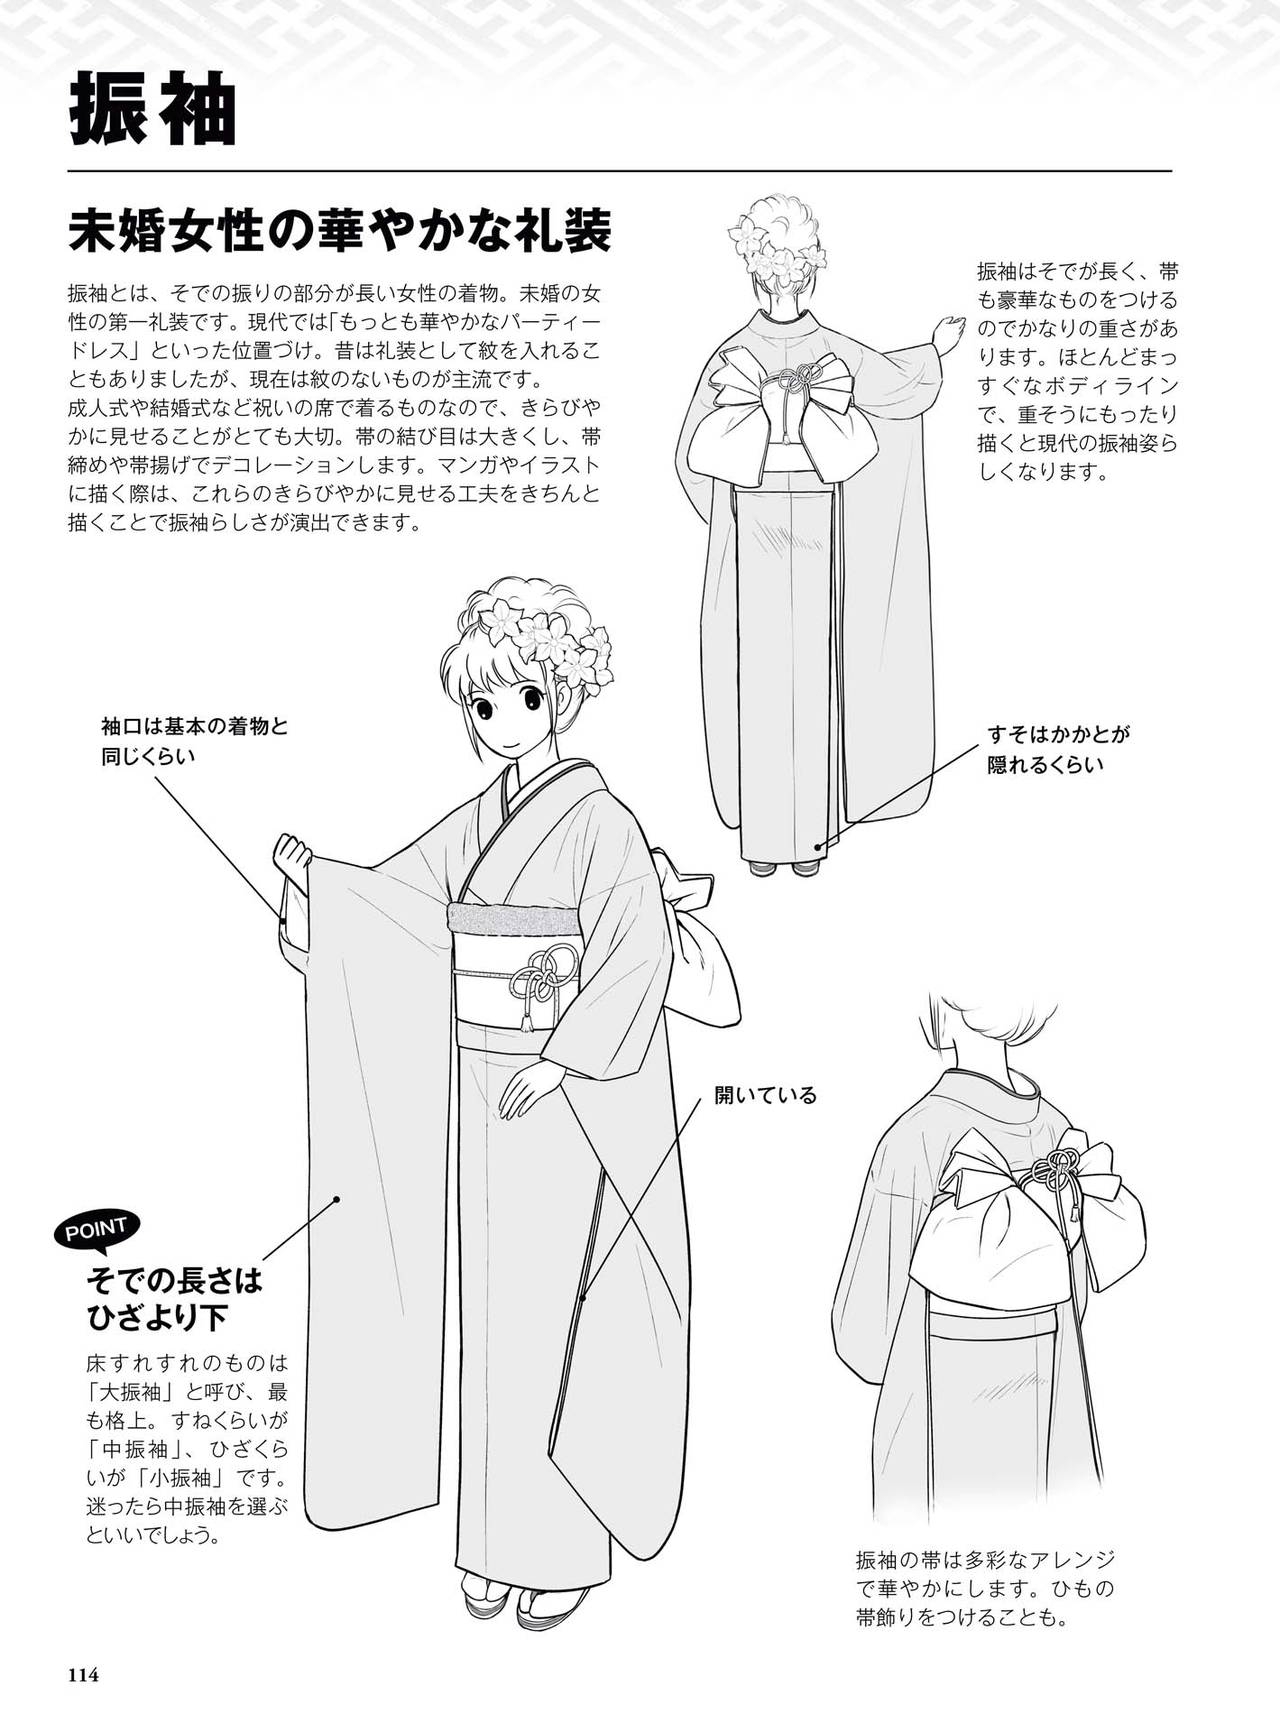 How to draw a kimono: From the basics to the point to advanced 115